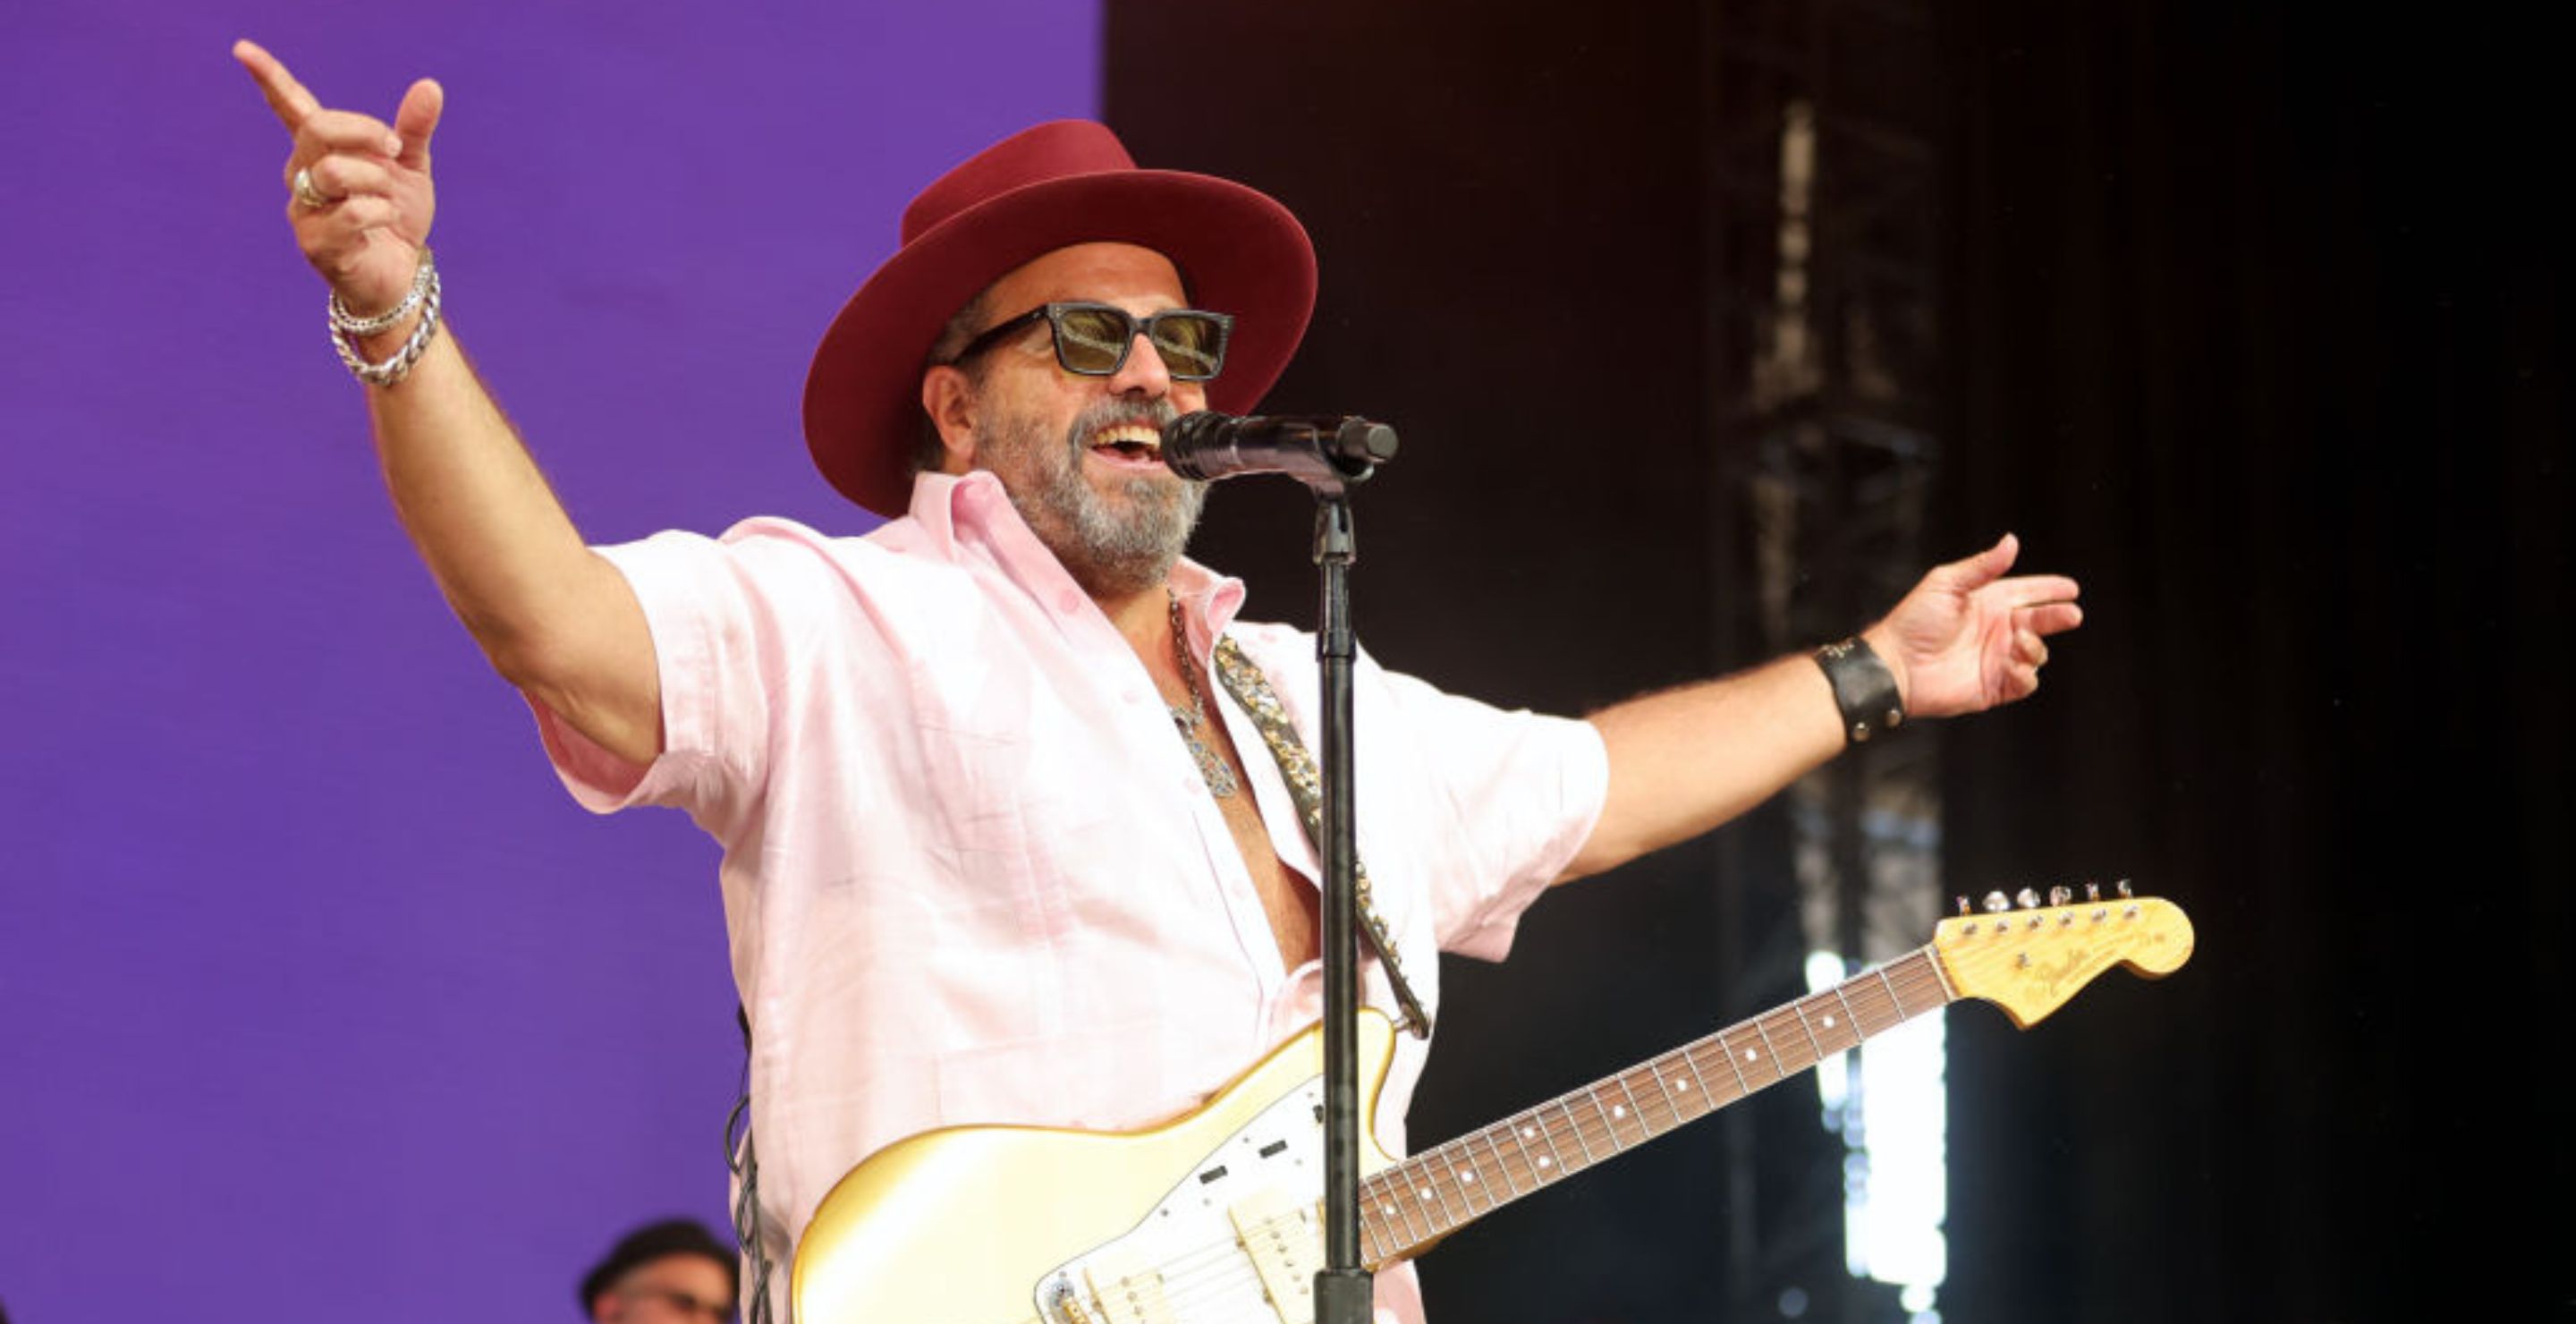 The Mavericks Frontman Raul Malo Gets Honest About Battle With Cancer